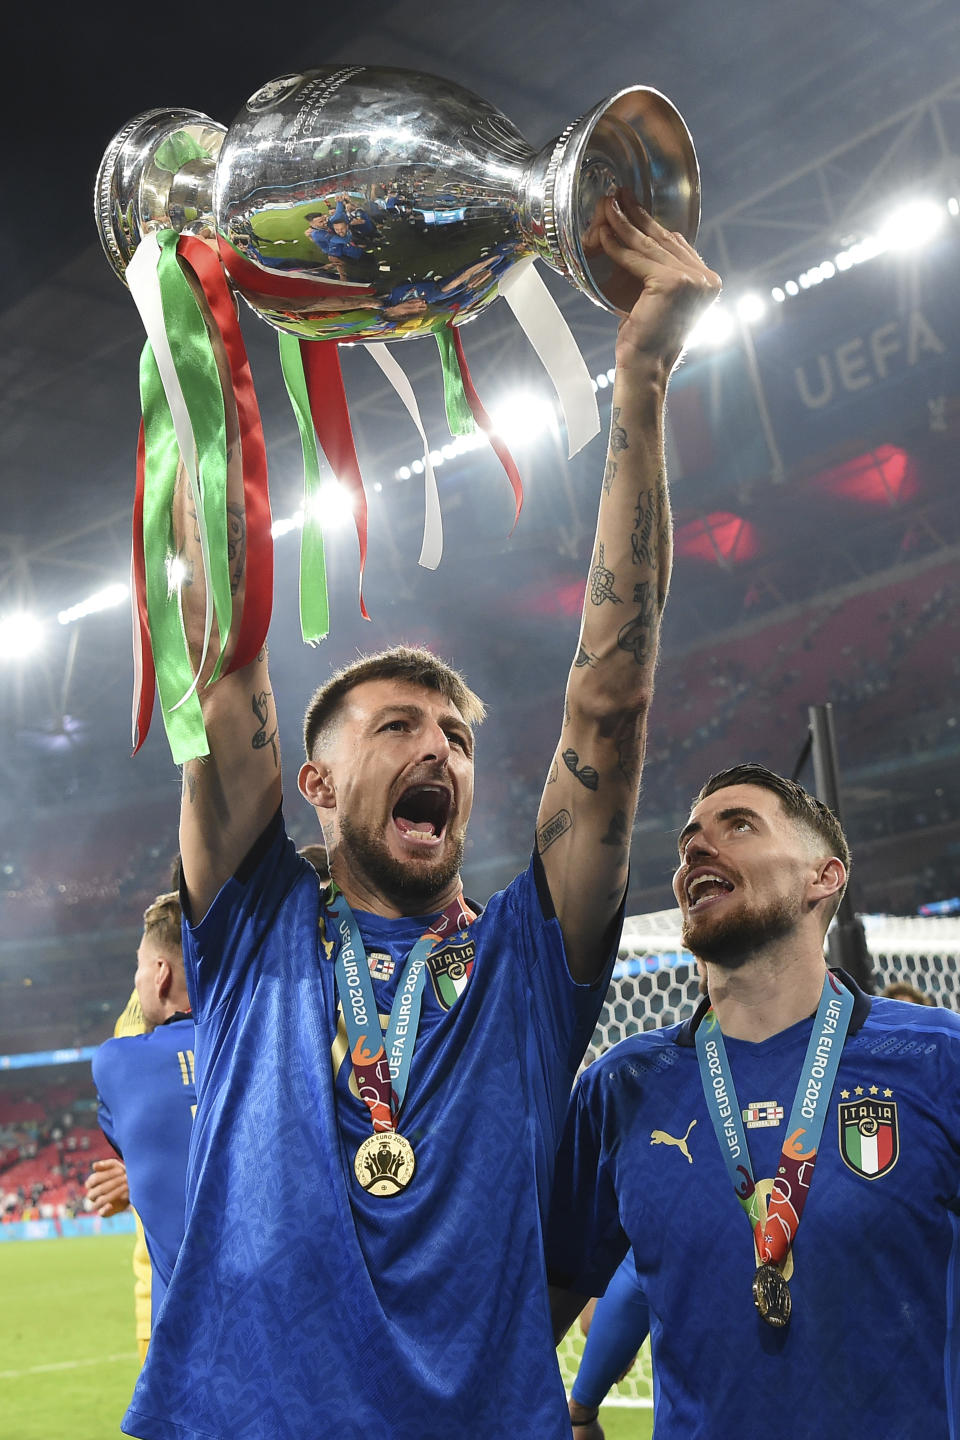 Italy's Francesco Acerbi holds up the trophy after the final of the Euro 2020 soccer final match between England and Italy at Wembley stadium in London, Sunday, July 11, 2021. (Andy Rain/Pool Photo via AP)